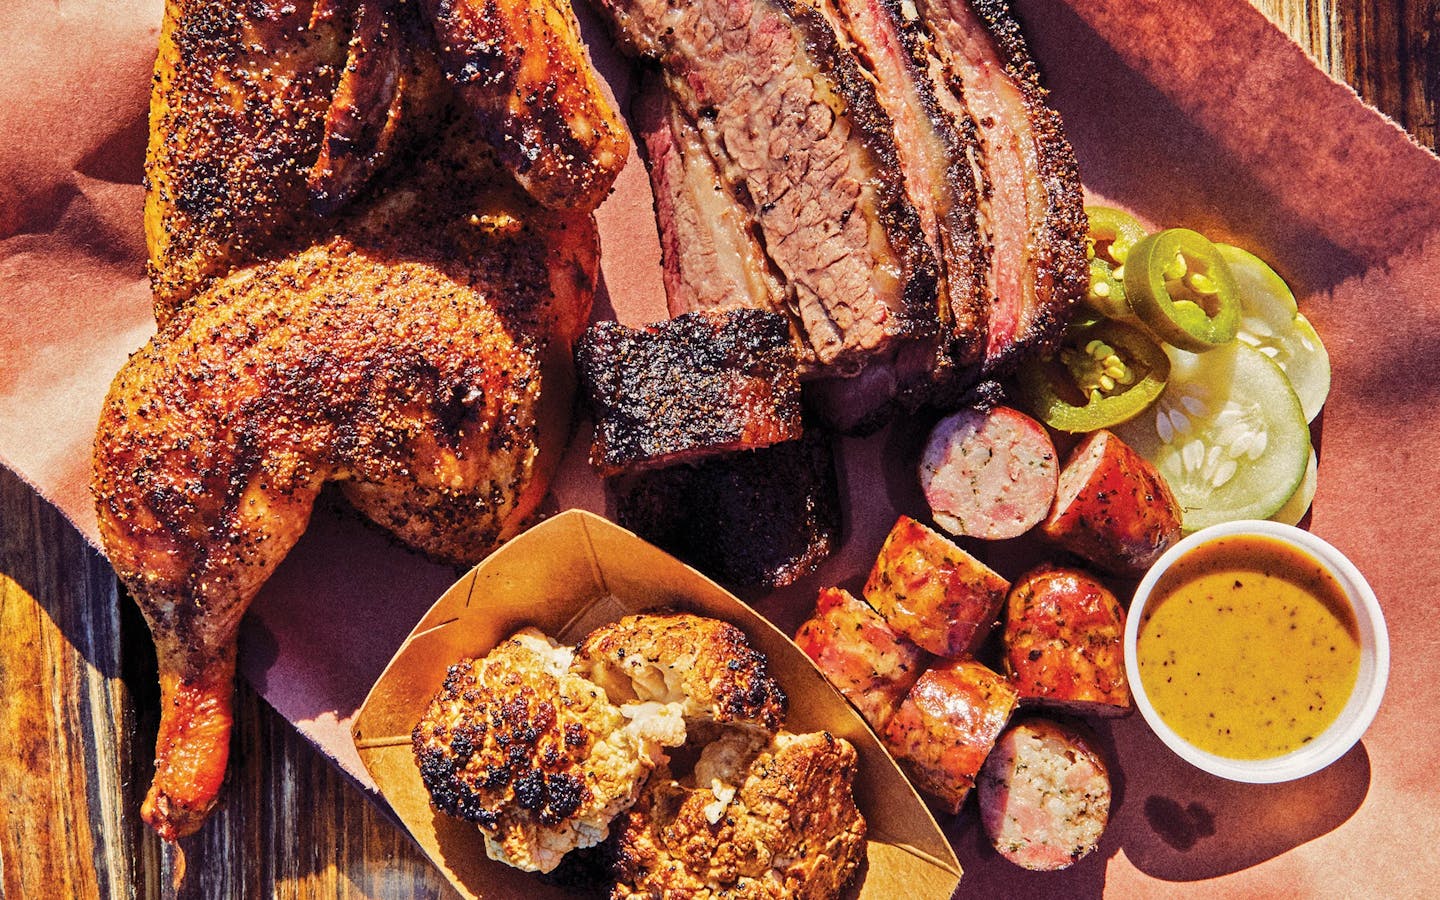 https://img.texasmonthly.com/2021/10/top-50-bbq-joints-list-feature.jpg?auto=compress&crop=faces&fit=crop&fm=jpg&h=900&ixlib=php-3.3.1&q=45&w=1600